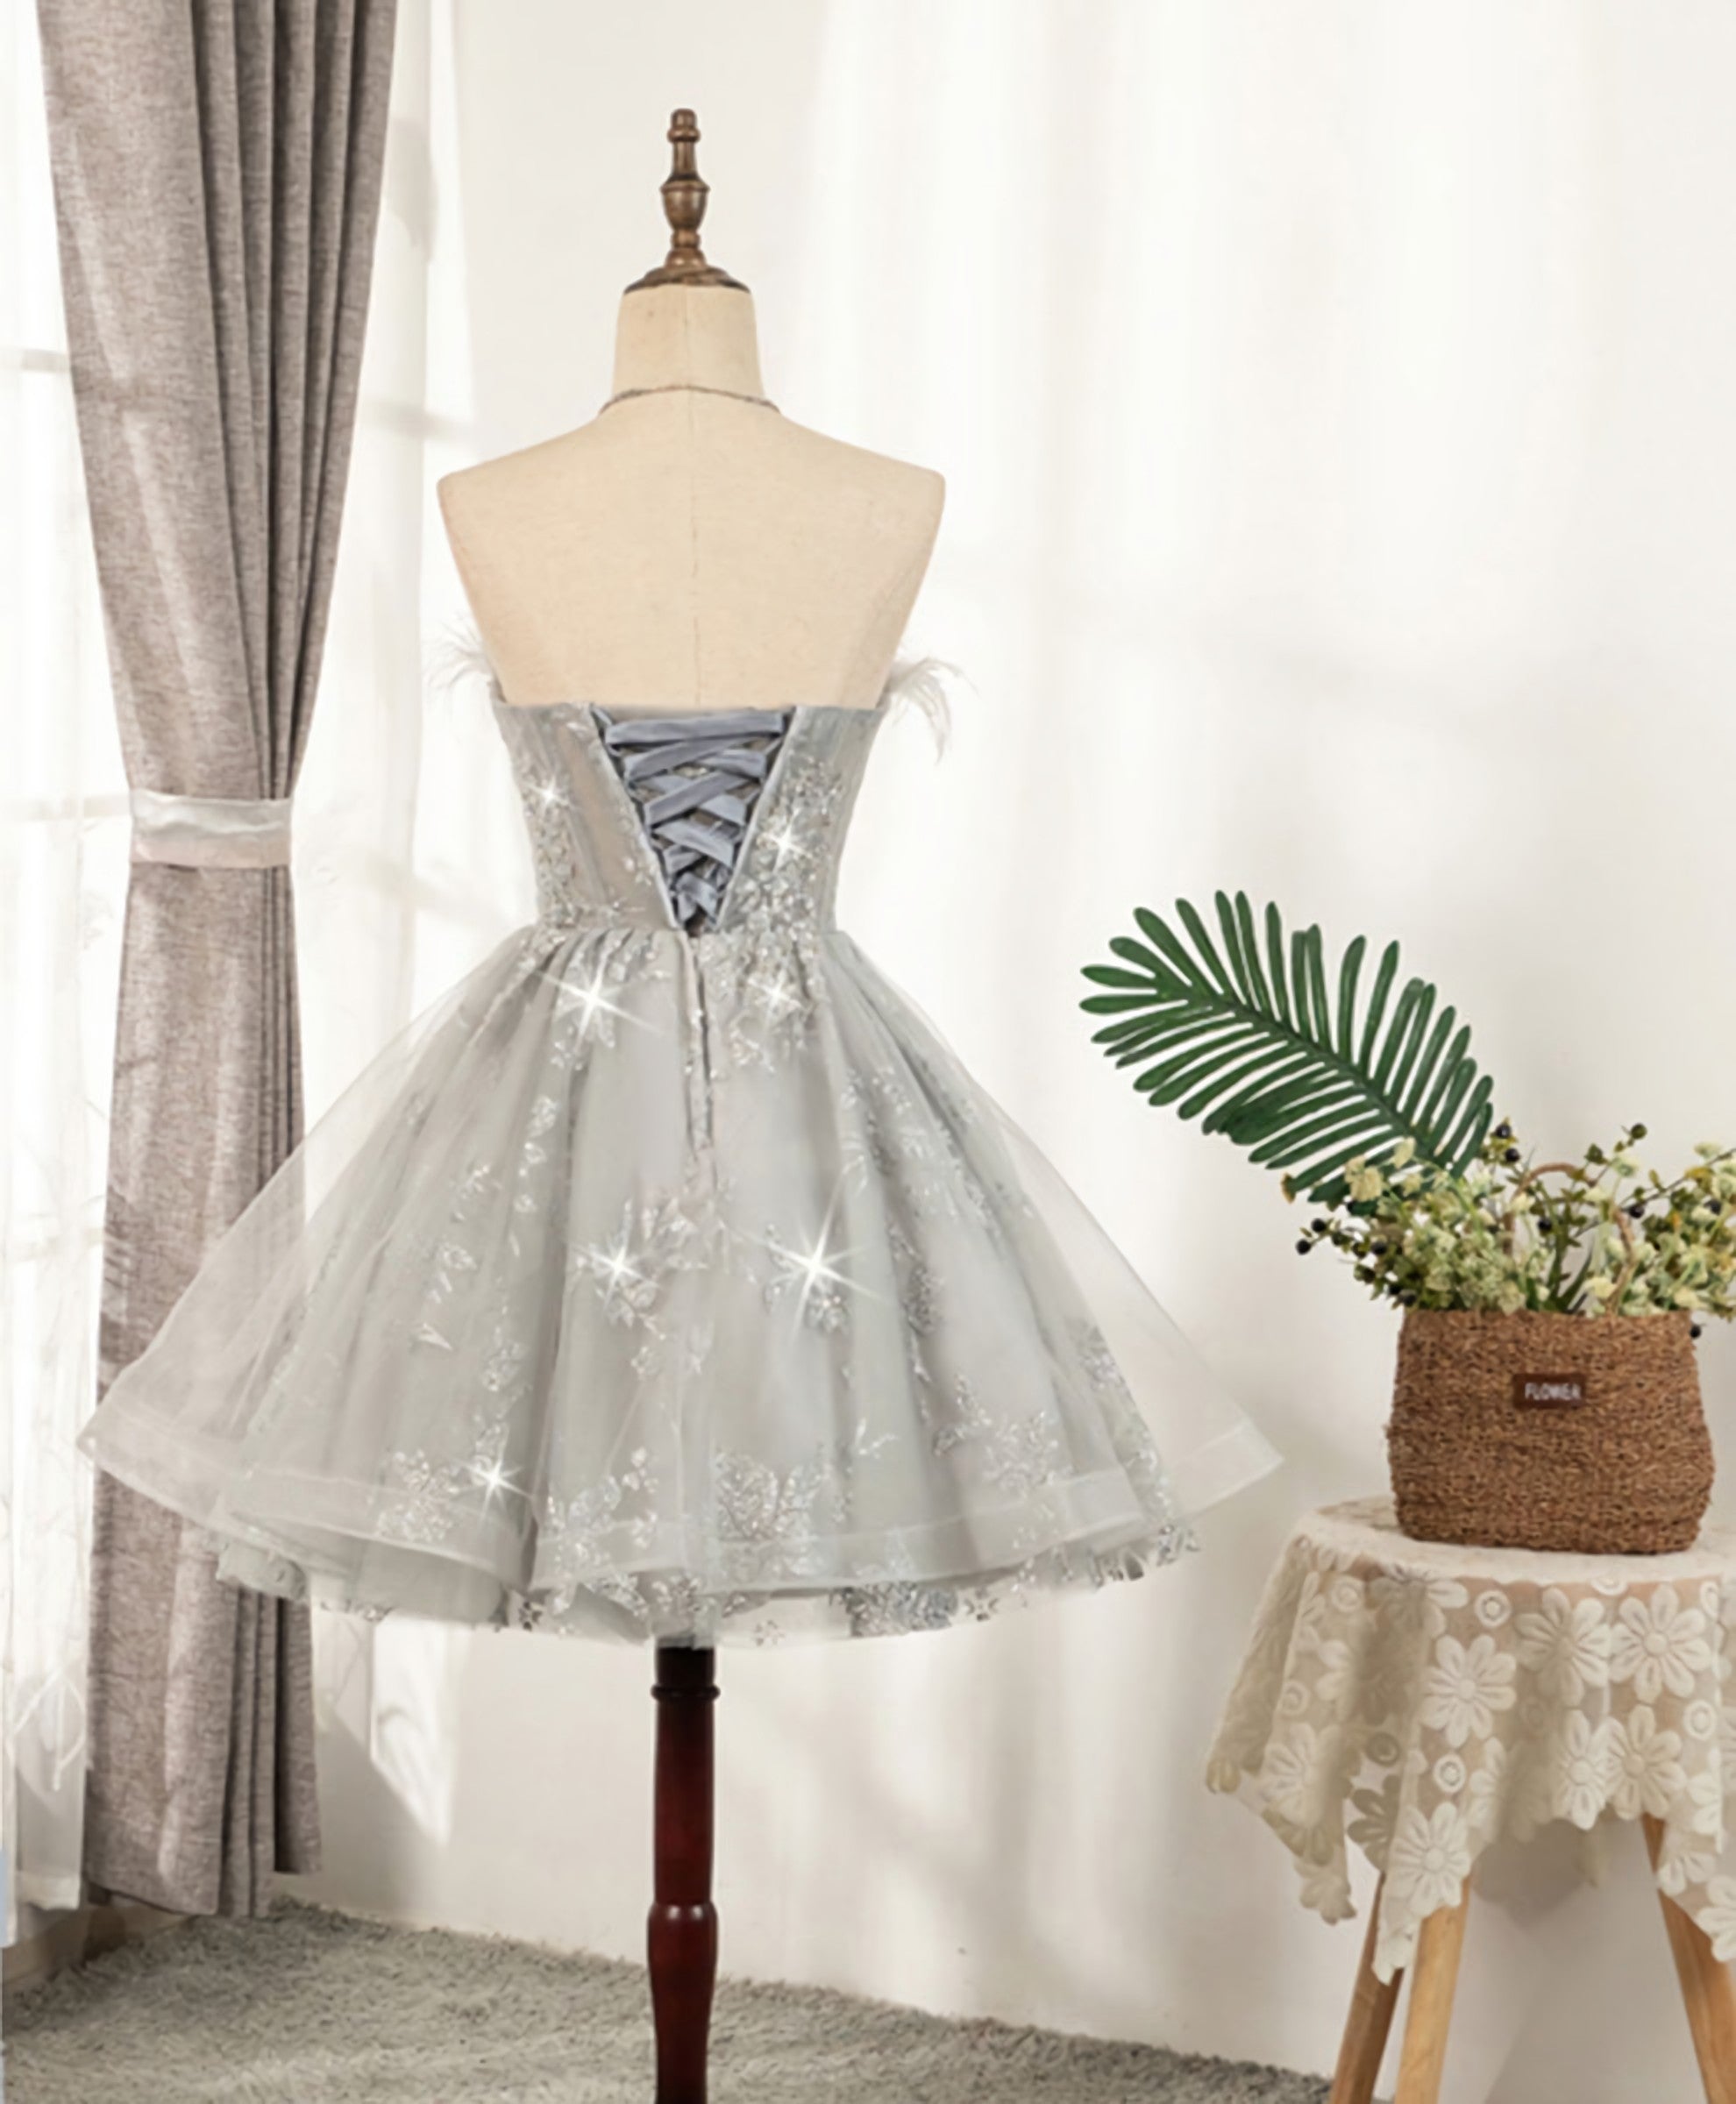 Party Dresses For Summer, Gray Sweetheart Lace Tulle Short Prom Dress, Gray Cocktail Dress